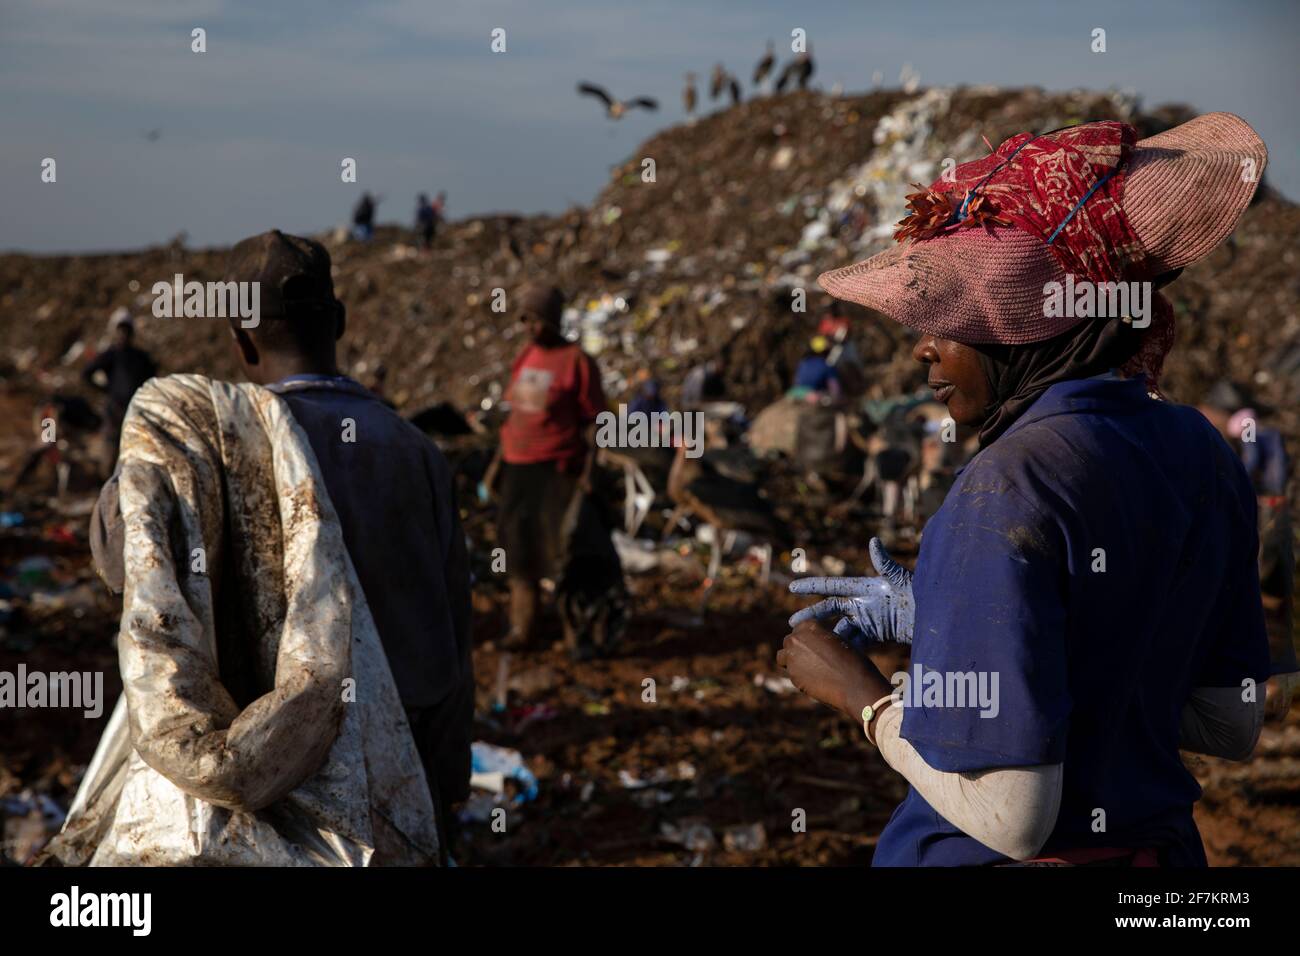 KAMPALA, UGANDA: Around 800 workers are employed at the landfill site. IMAGES showing exhausted Ugandan workers sifting through mountainous tons of du Stock Photo